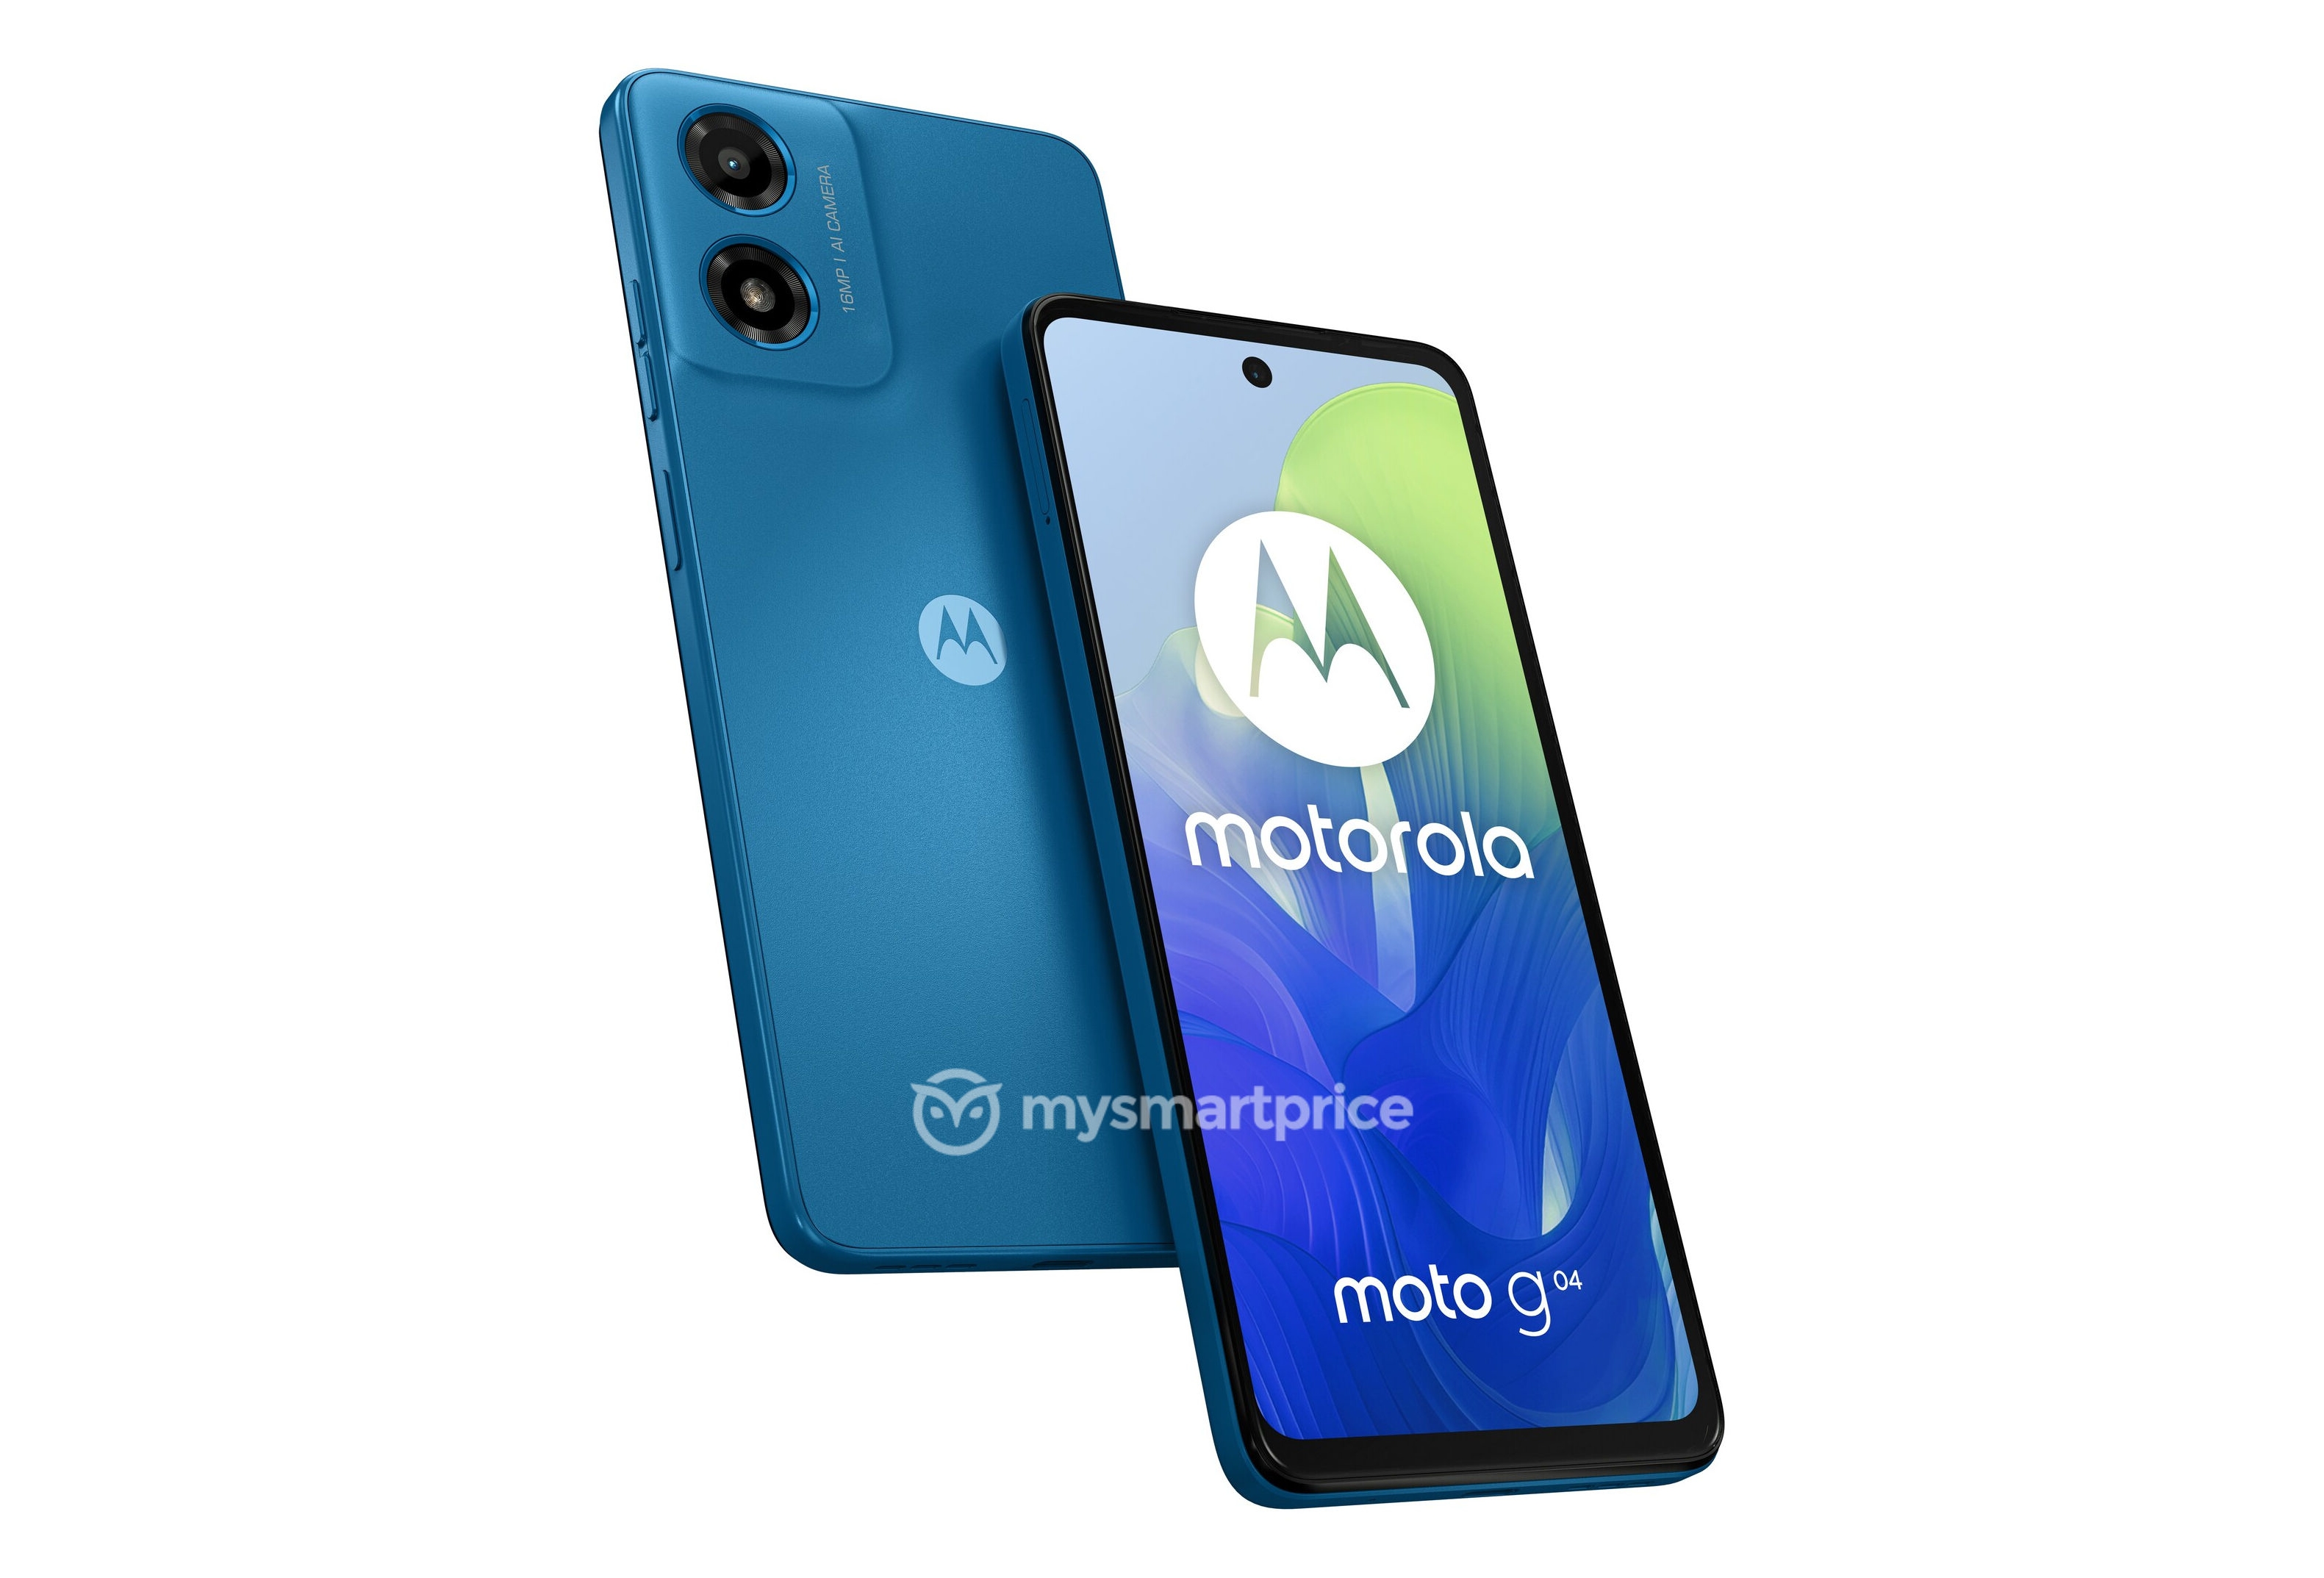 Motorola is preparing to release a budget smartphone Moto G04 with a 16 MP camera